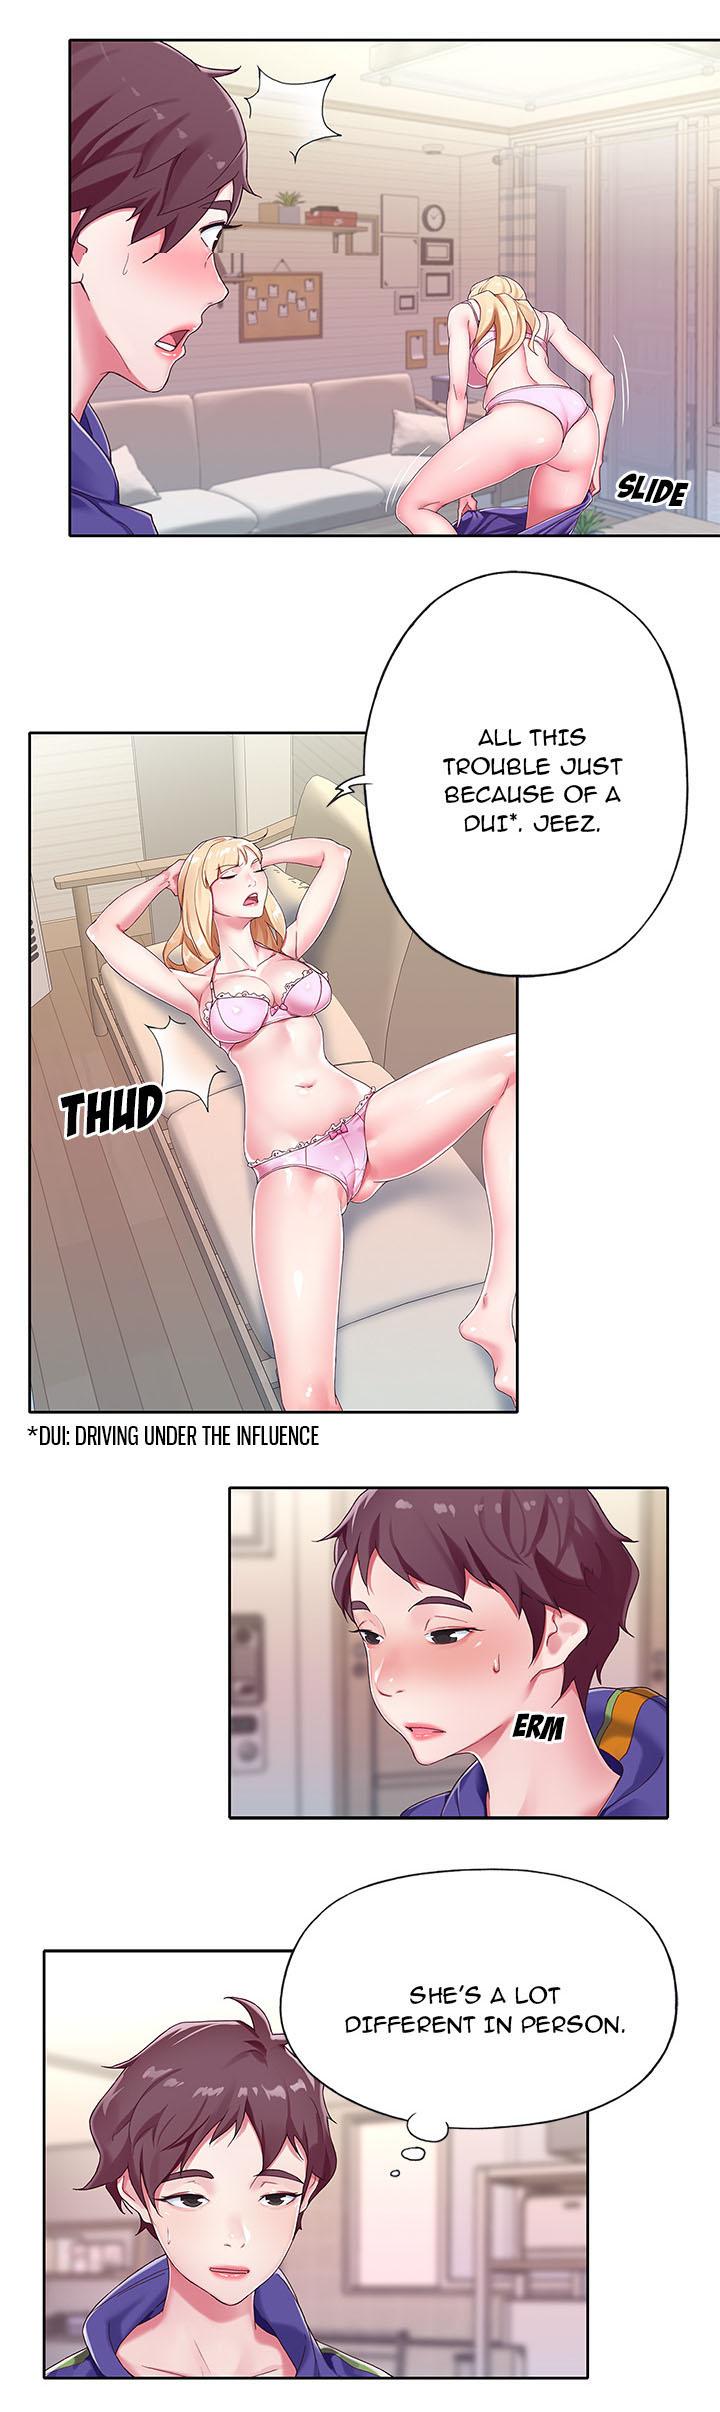 Hot Naked Girl The Idol Project Ch.2/? Sub - Page 9